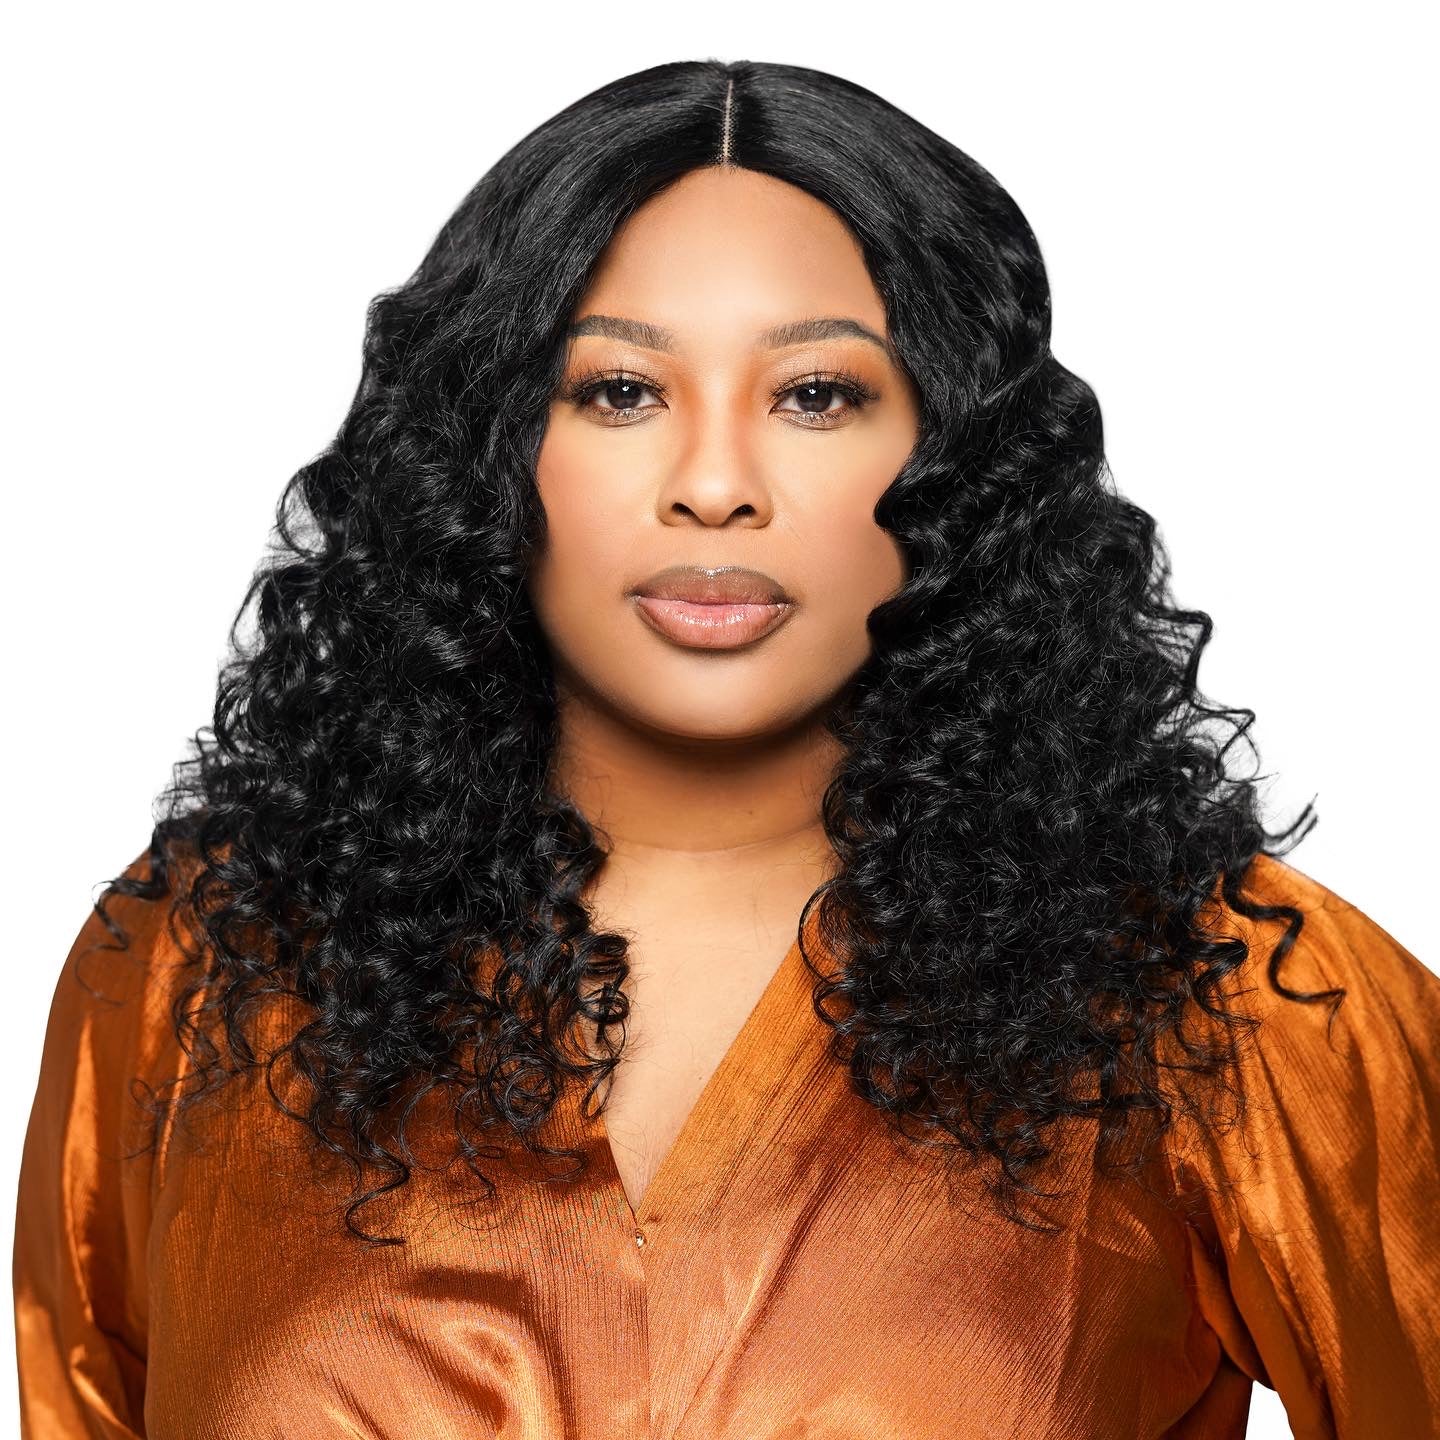 human hair blend wigs affordable in price. deepwave curly wigs. cheap human hair wigs. 